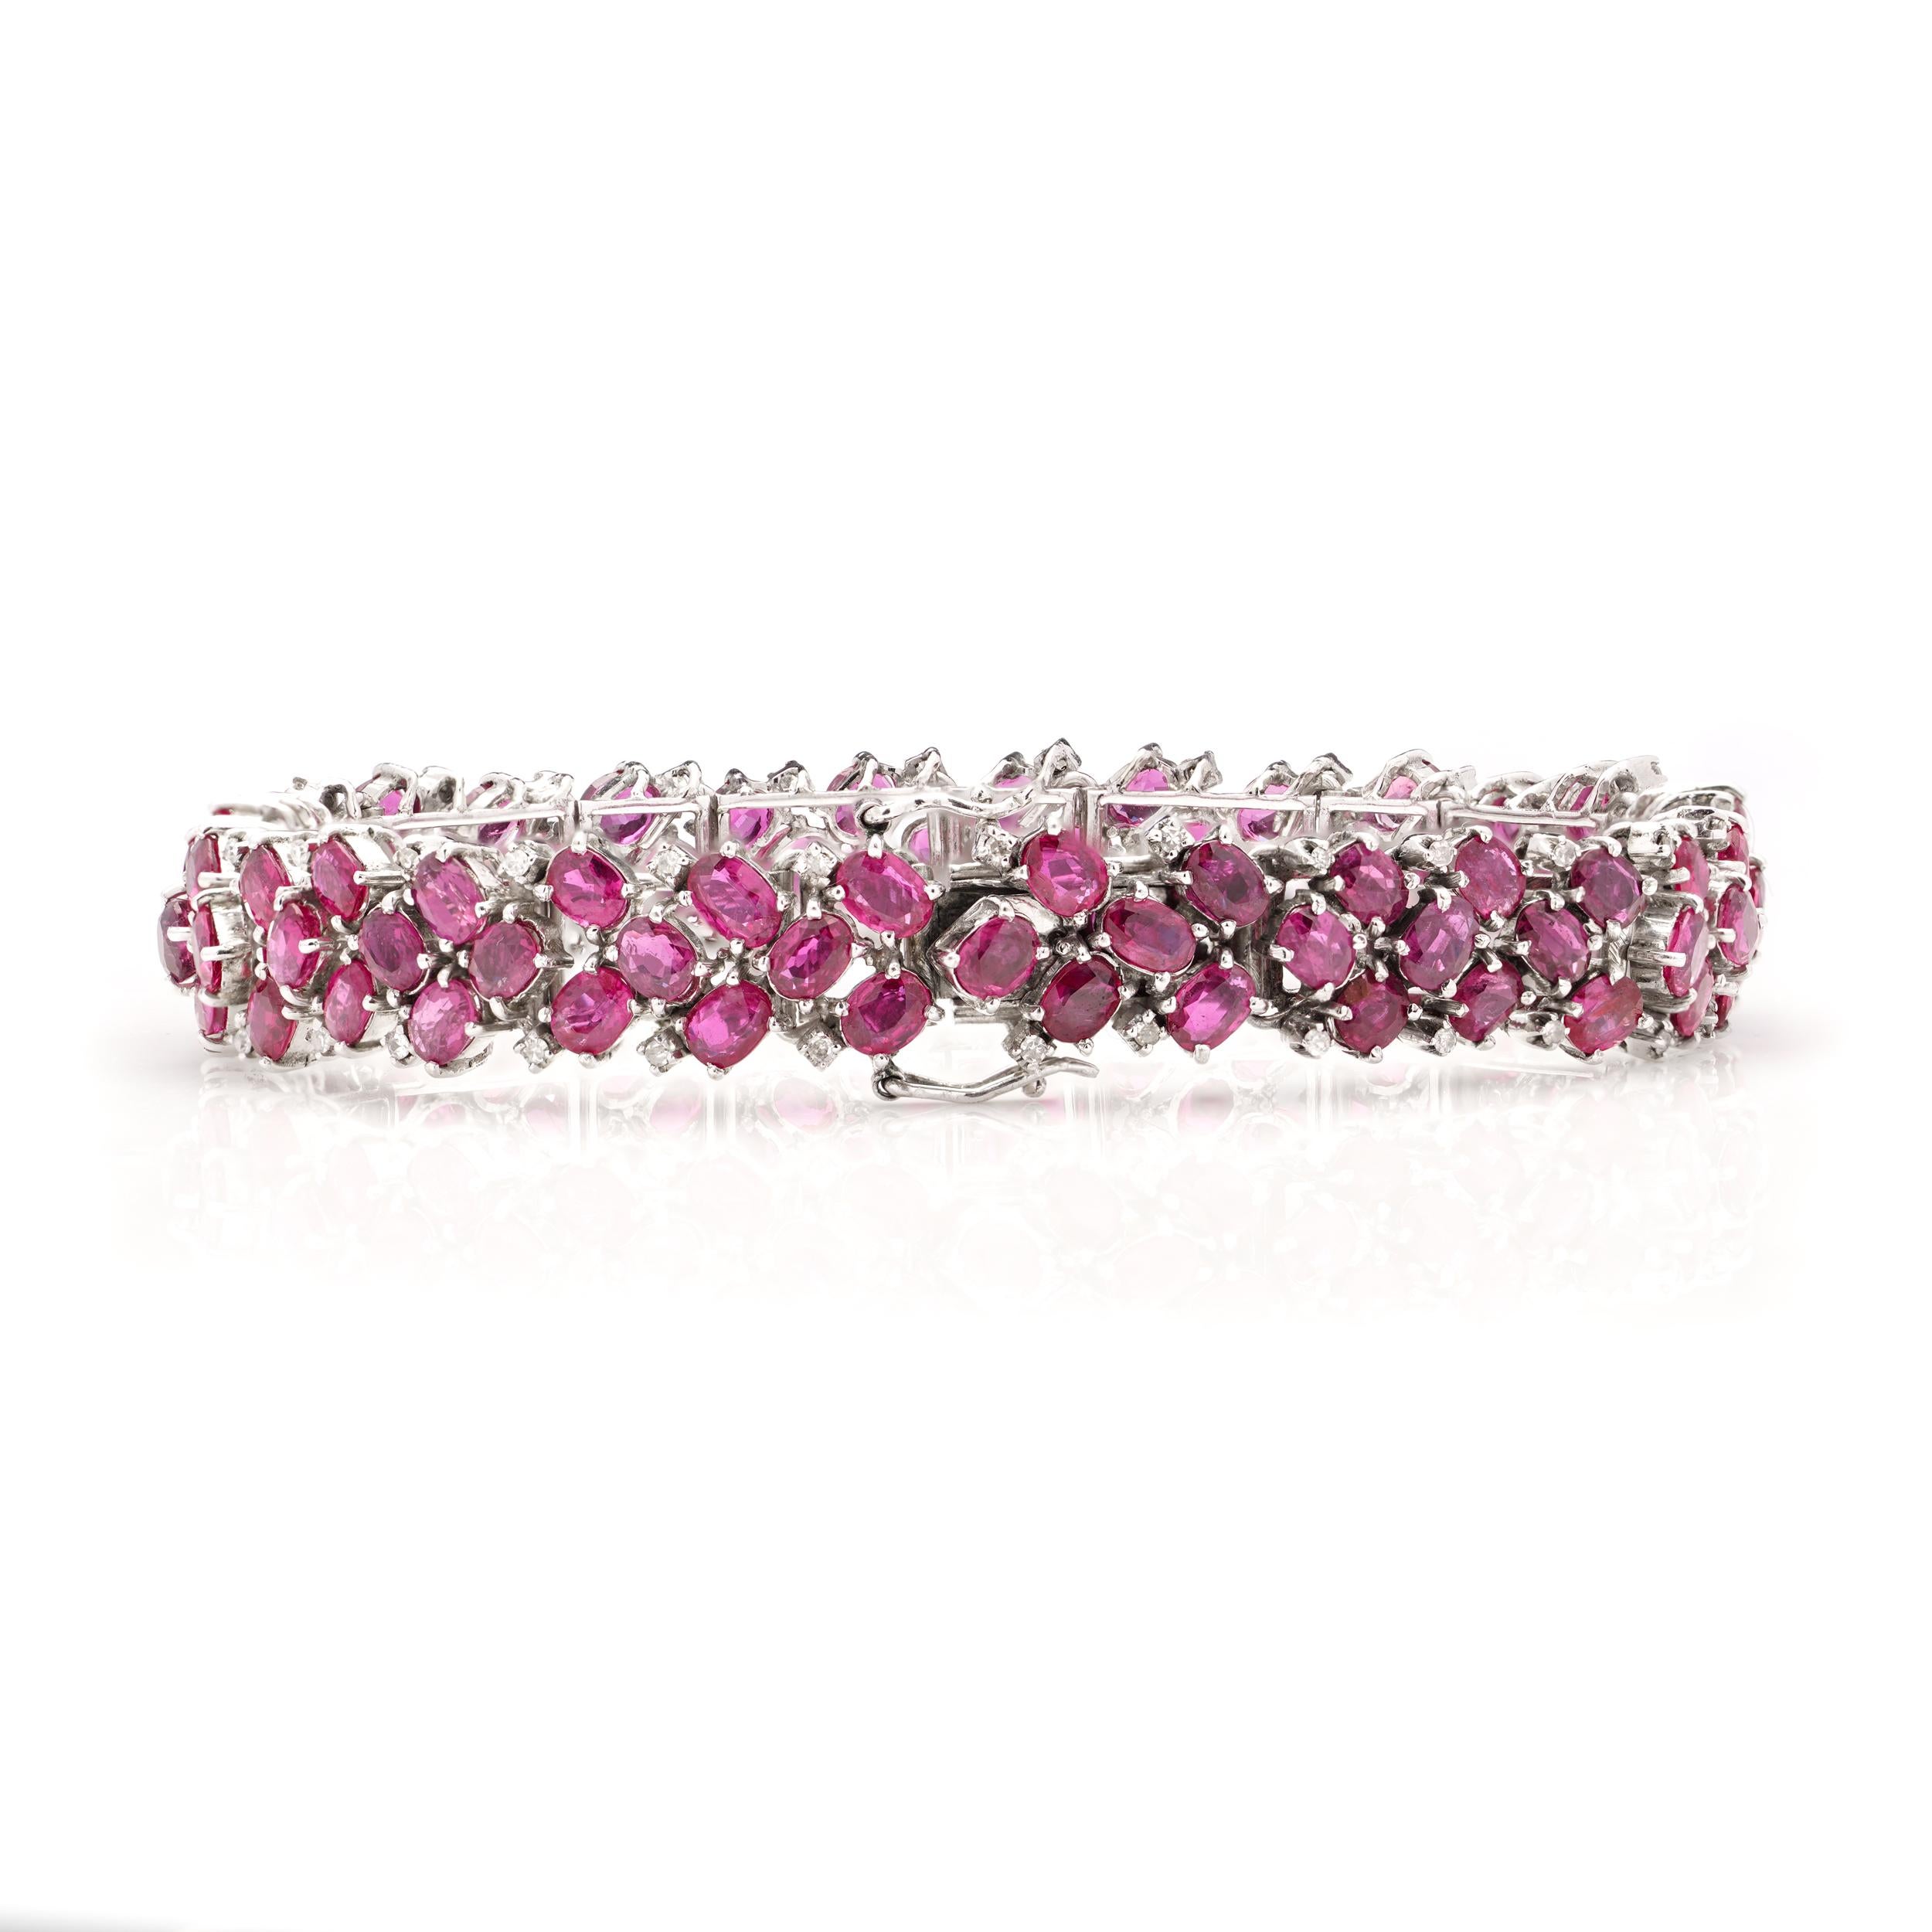 14kt. white gold link bracelet set with 22.5 carats of oval faceted rubies and 0.60 carats of round brilliant diamonds. 

Made in Circa 1980's
Hallmarked for 14kt. gold. 

Dimensions:
Bracelet Full length: 21.5 cm 
Width: 1.2 cm
Depth: 0.7 cm